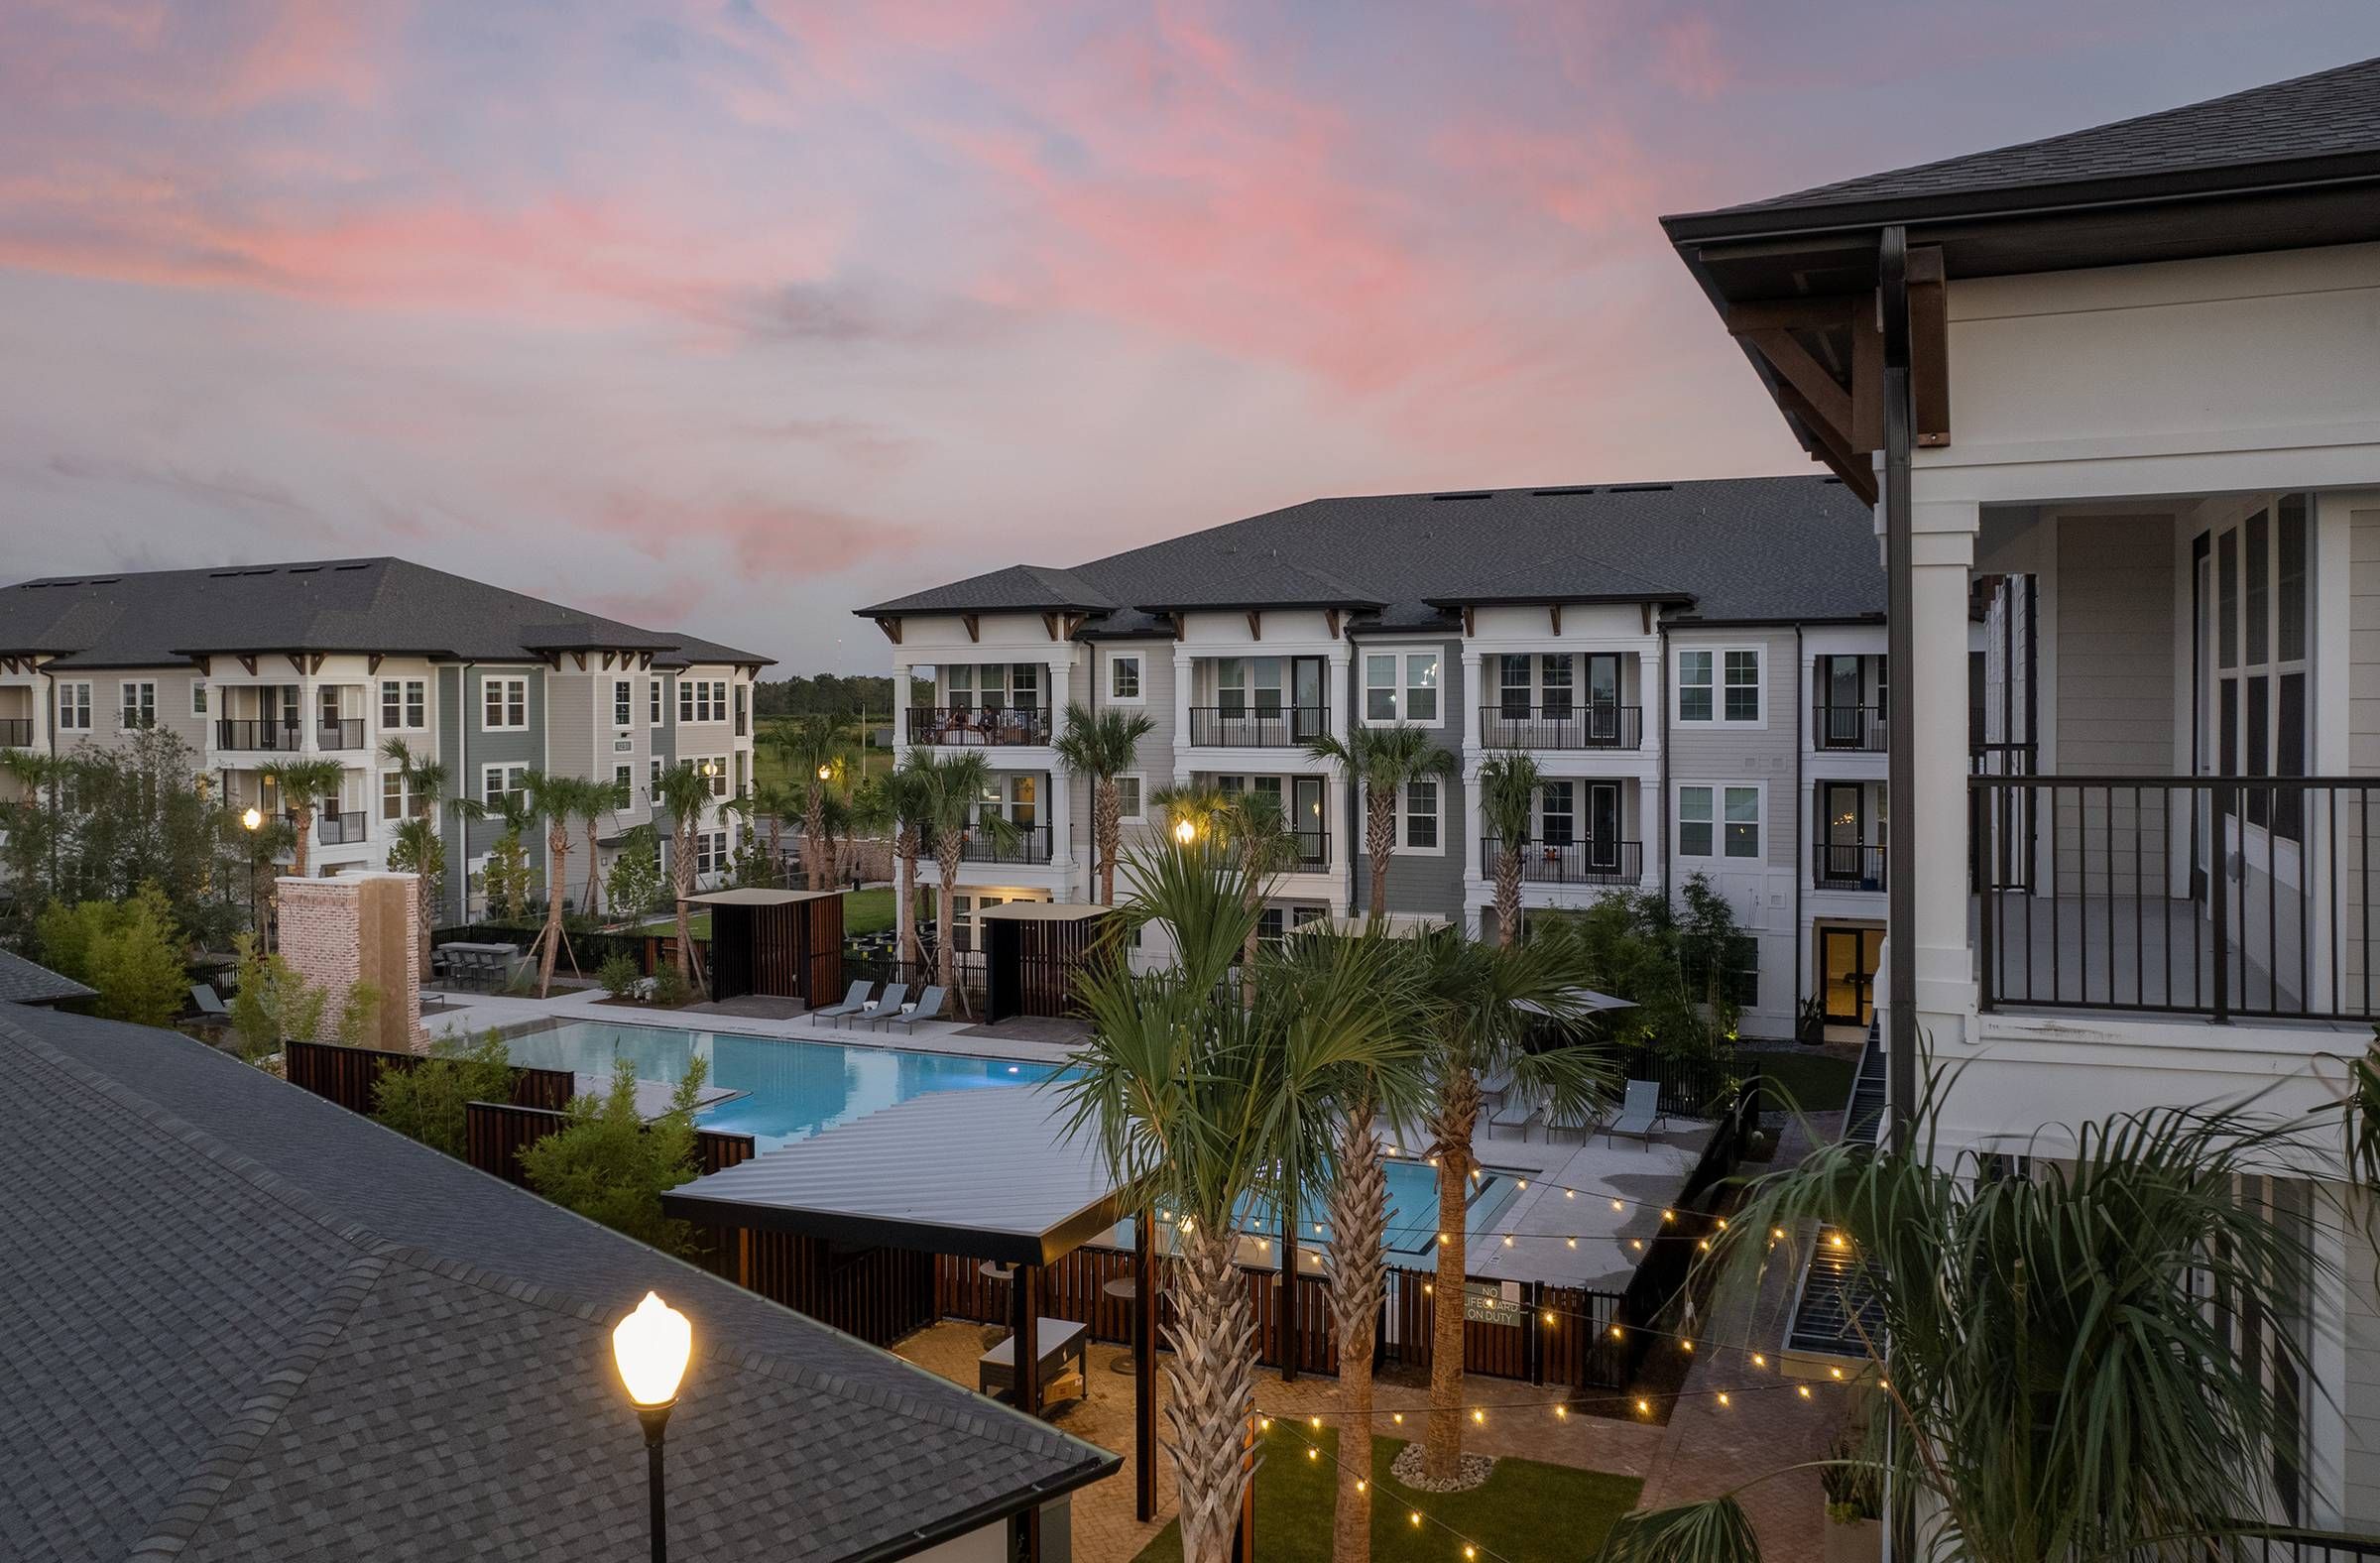 Dusk settles over the serene pool and deck area at Alta Winter Garden, accented by warm lighting and tropical landscaping.